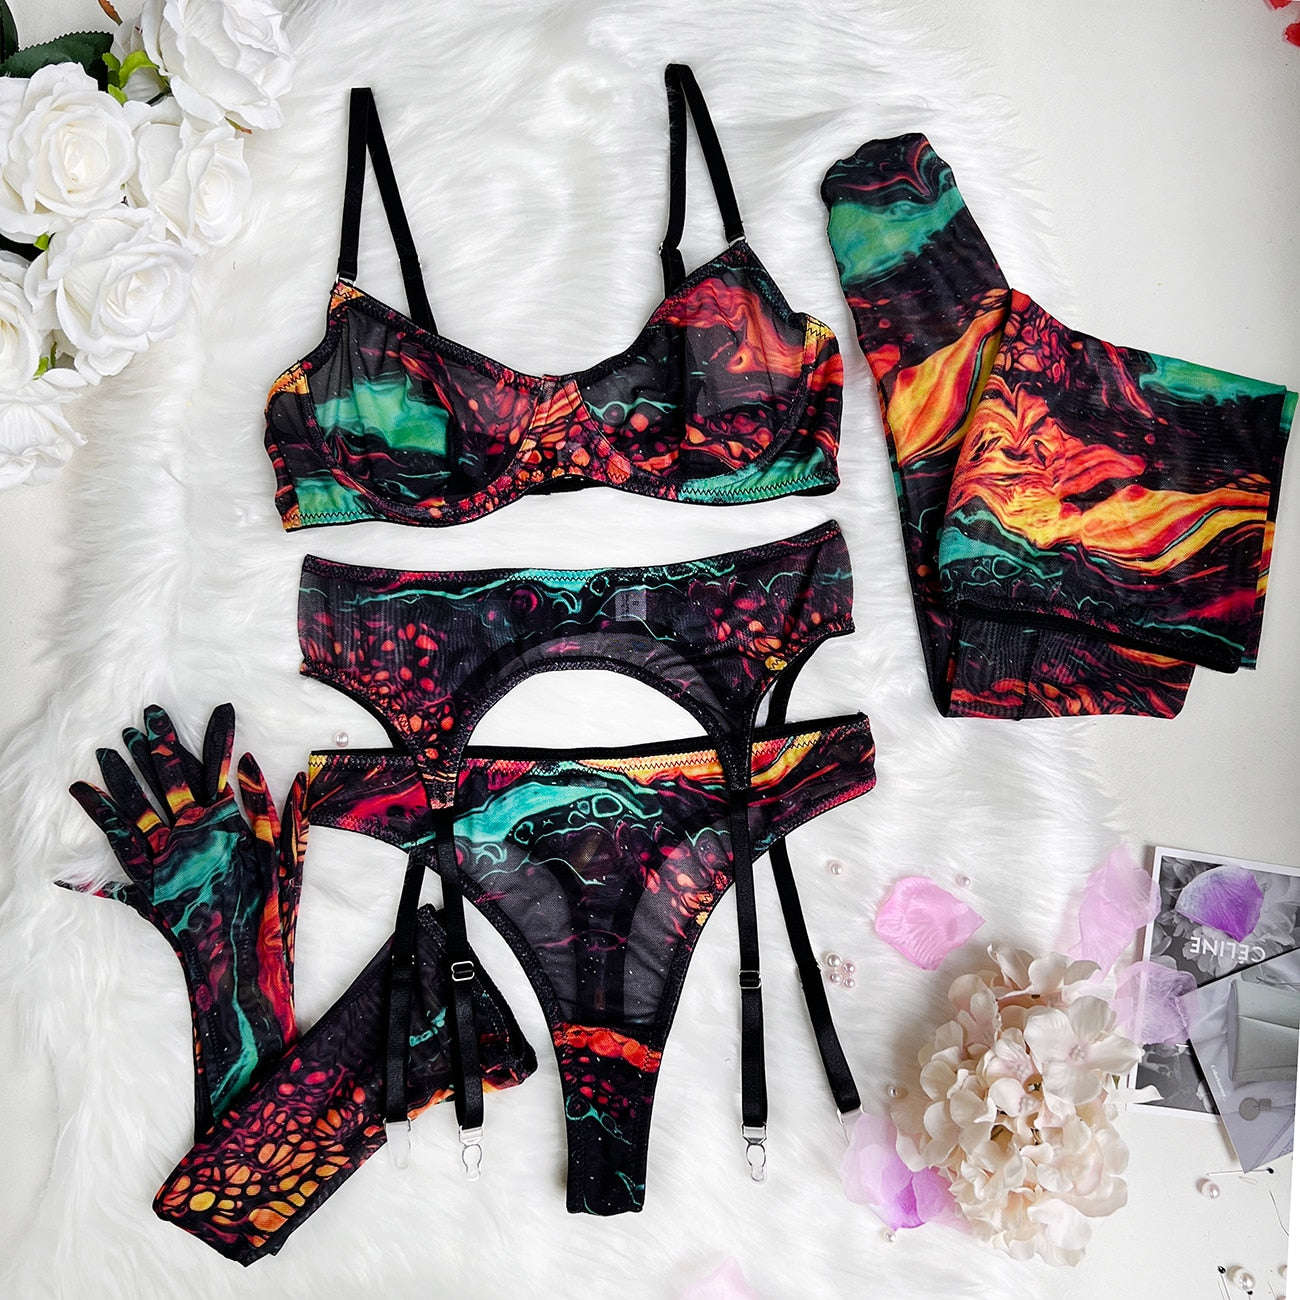 Tie Dye Lingerie With Stocking Sleeve Sexy Fancy Underwear 5-Piece Uncensored Intimate See Through Mesh Sensual Outfits